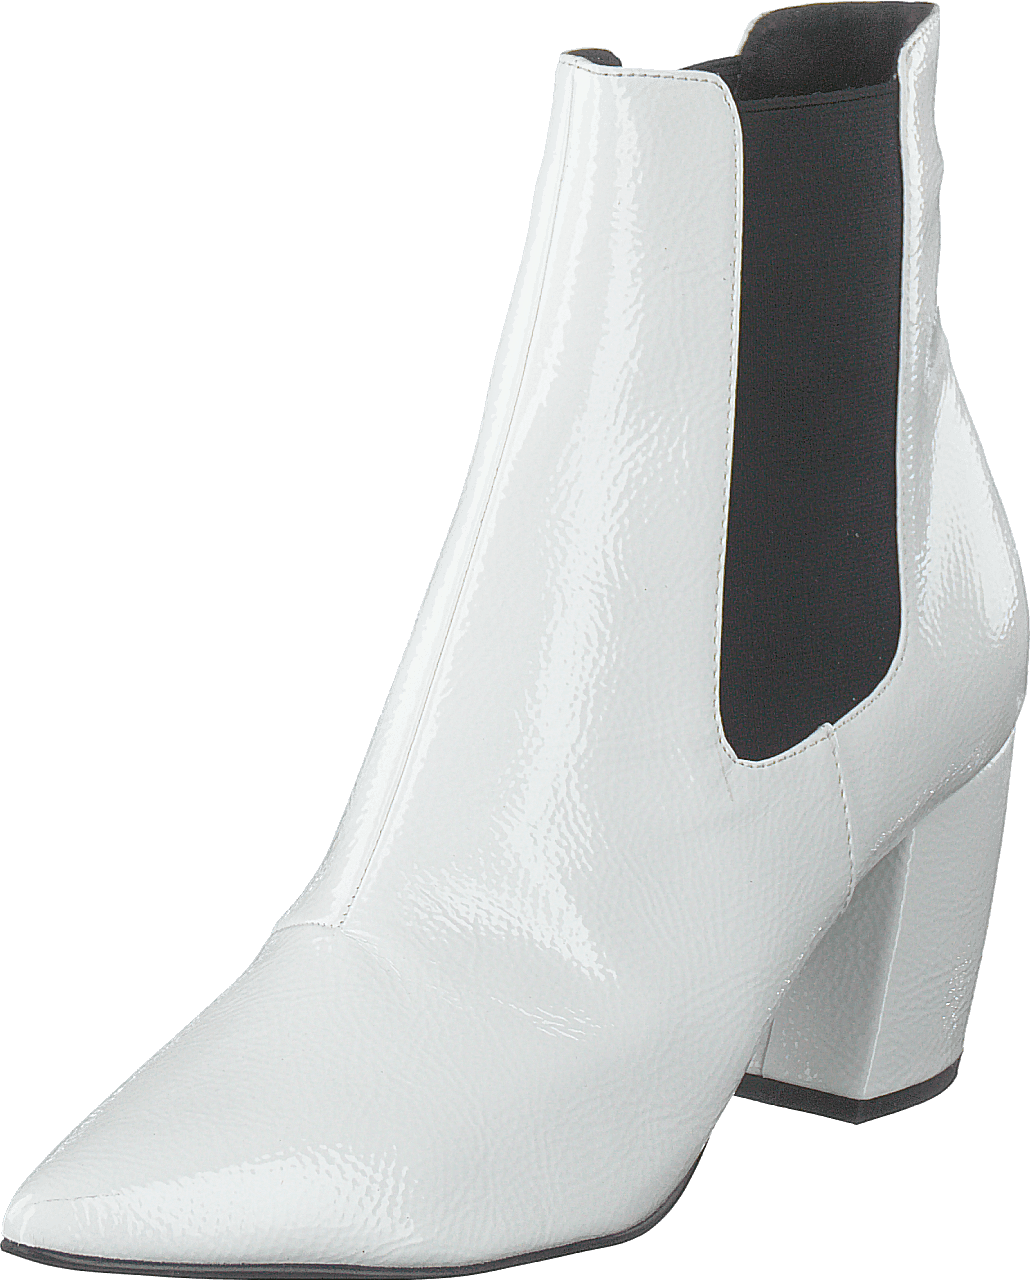 Candy Flaired Boot 803 - White 3